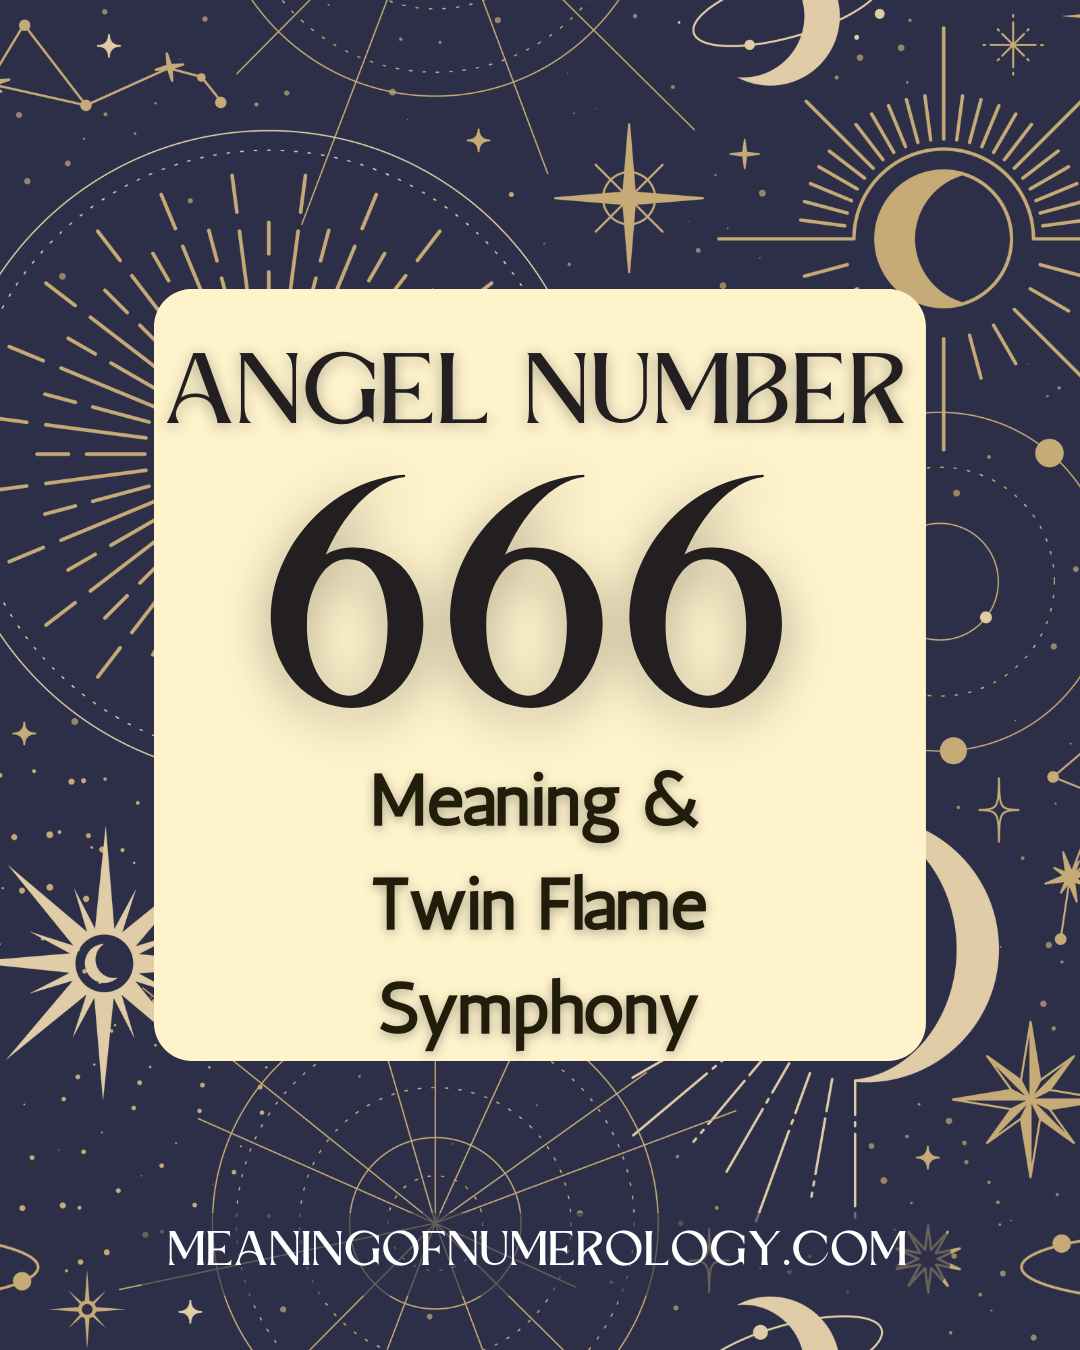 Purple Mystic Astrology Moon Angel Number 666 Meaning & Twin Flame Symphony